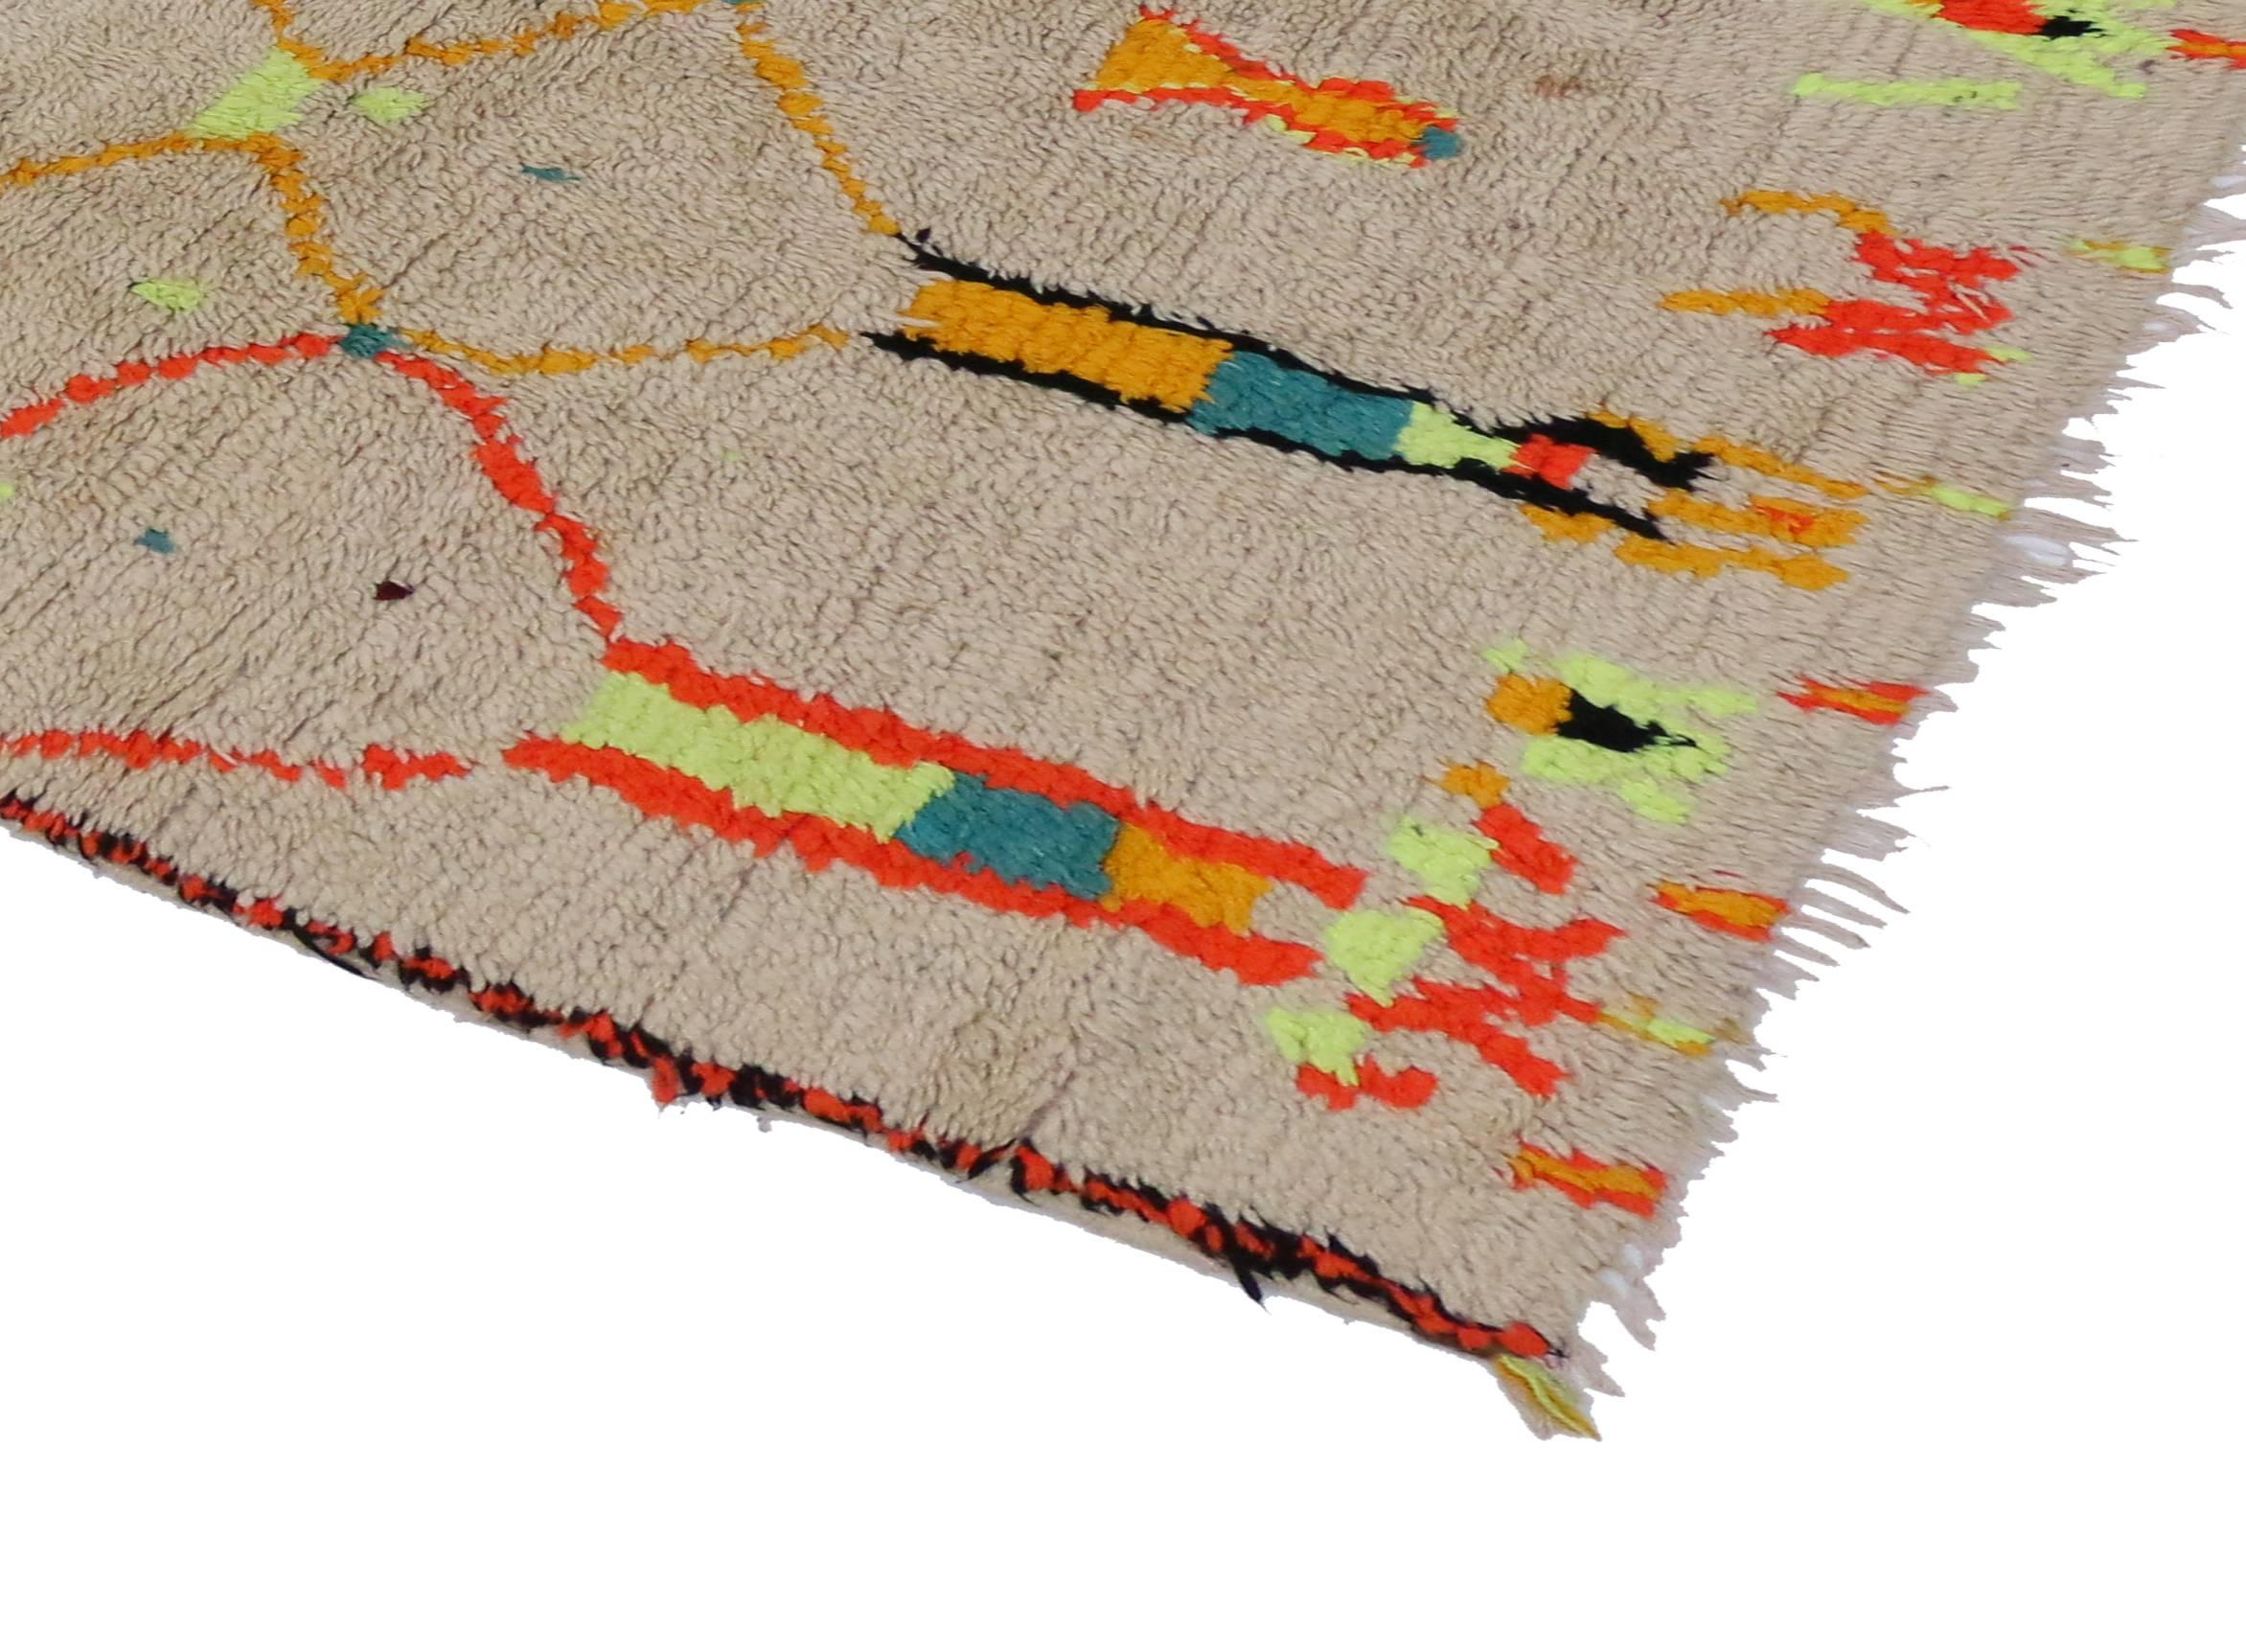 With its boho chic style and primitive charm, this vintage Berber Moroccan runner with modern tribal design conveys a sense of beauty and mystery. Impeccably woven from hand-knotted wool in vibrant colors, this Moroccan rug runner does an excellent